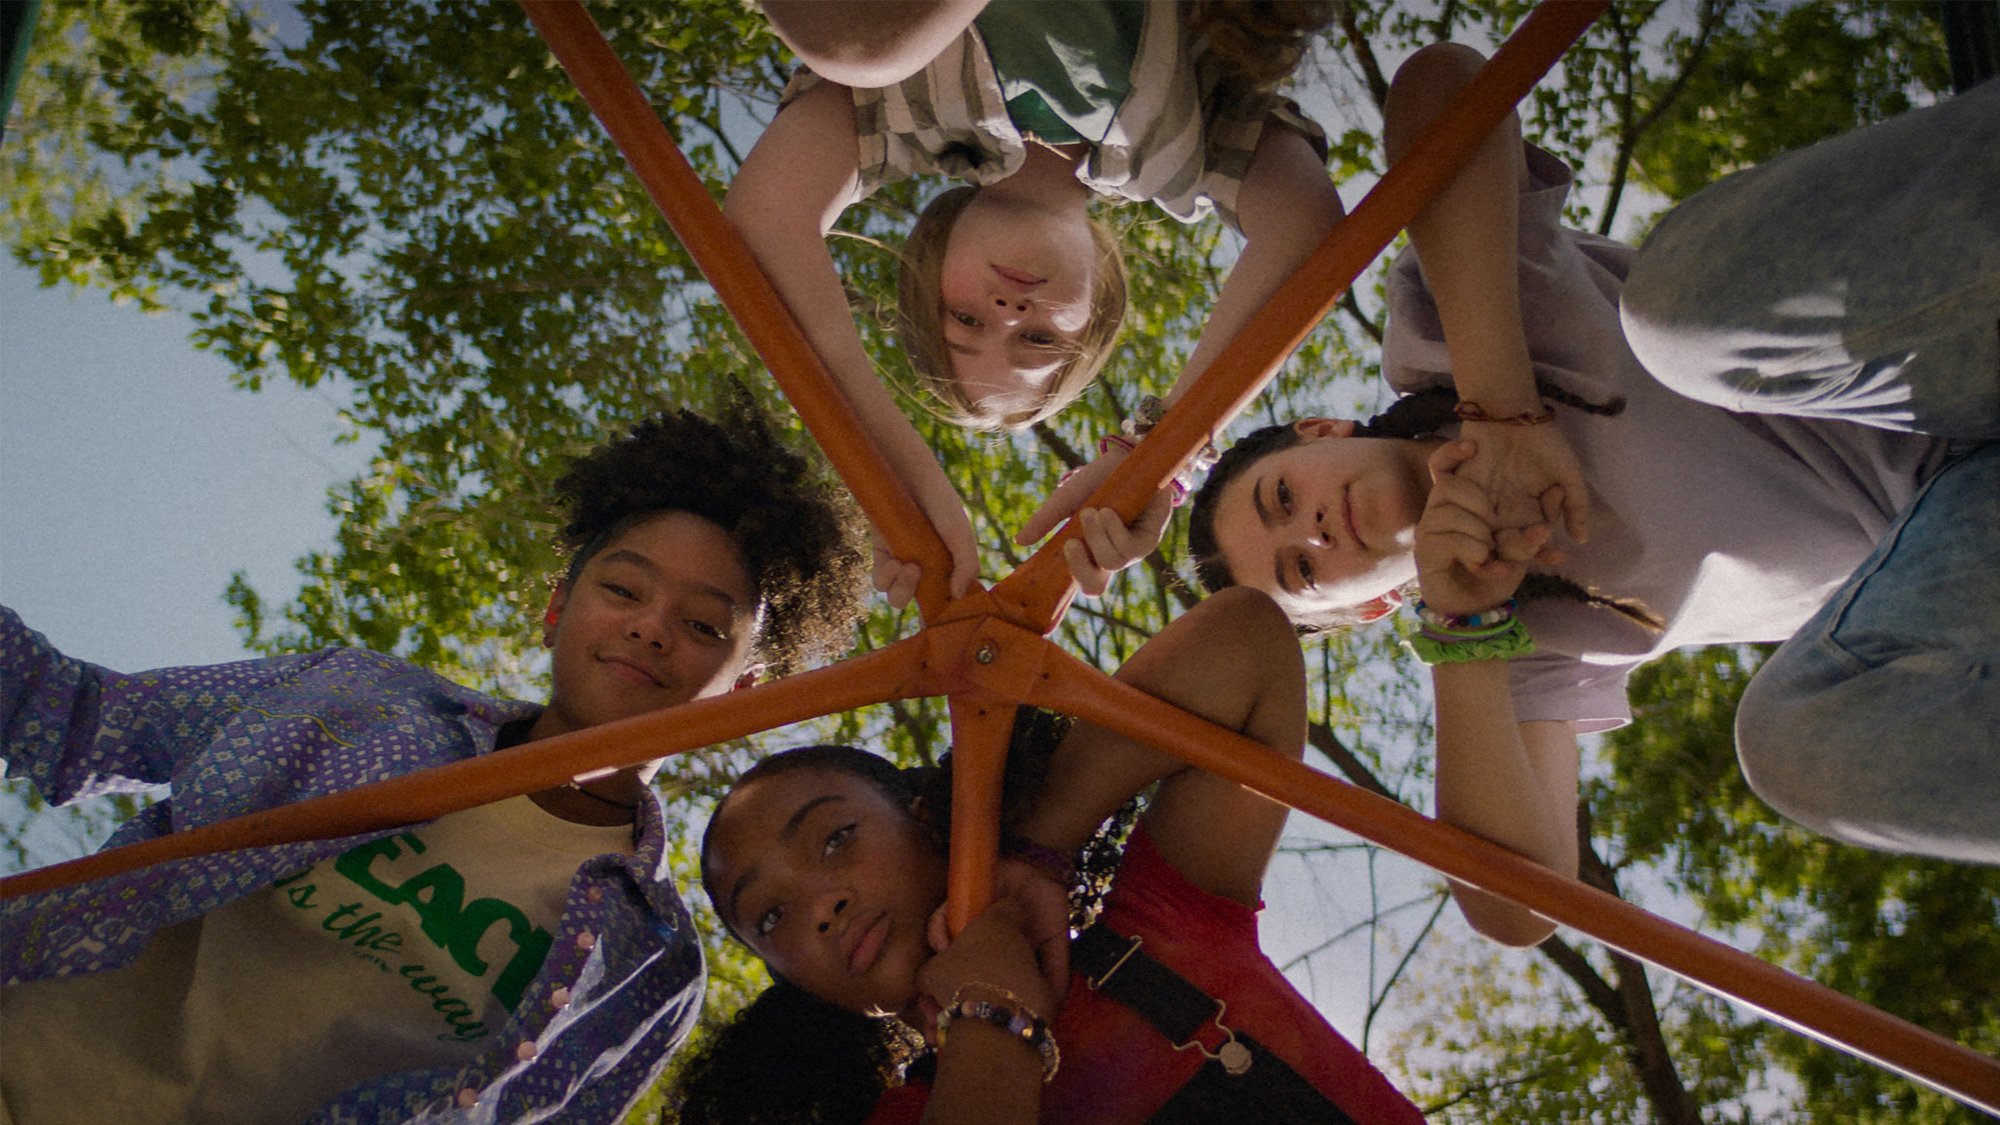 'Summering' Madalen Mills as Dina, Sanai Victoria as Lola, Eden Grace Redfield as Mari, and Lia Barnett as Daisy looking down with trees in the background